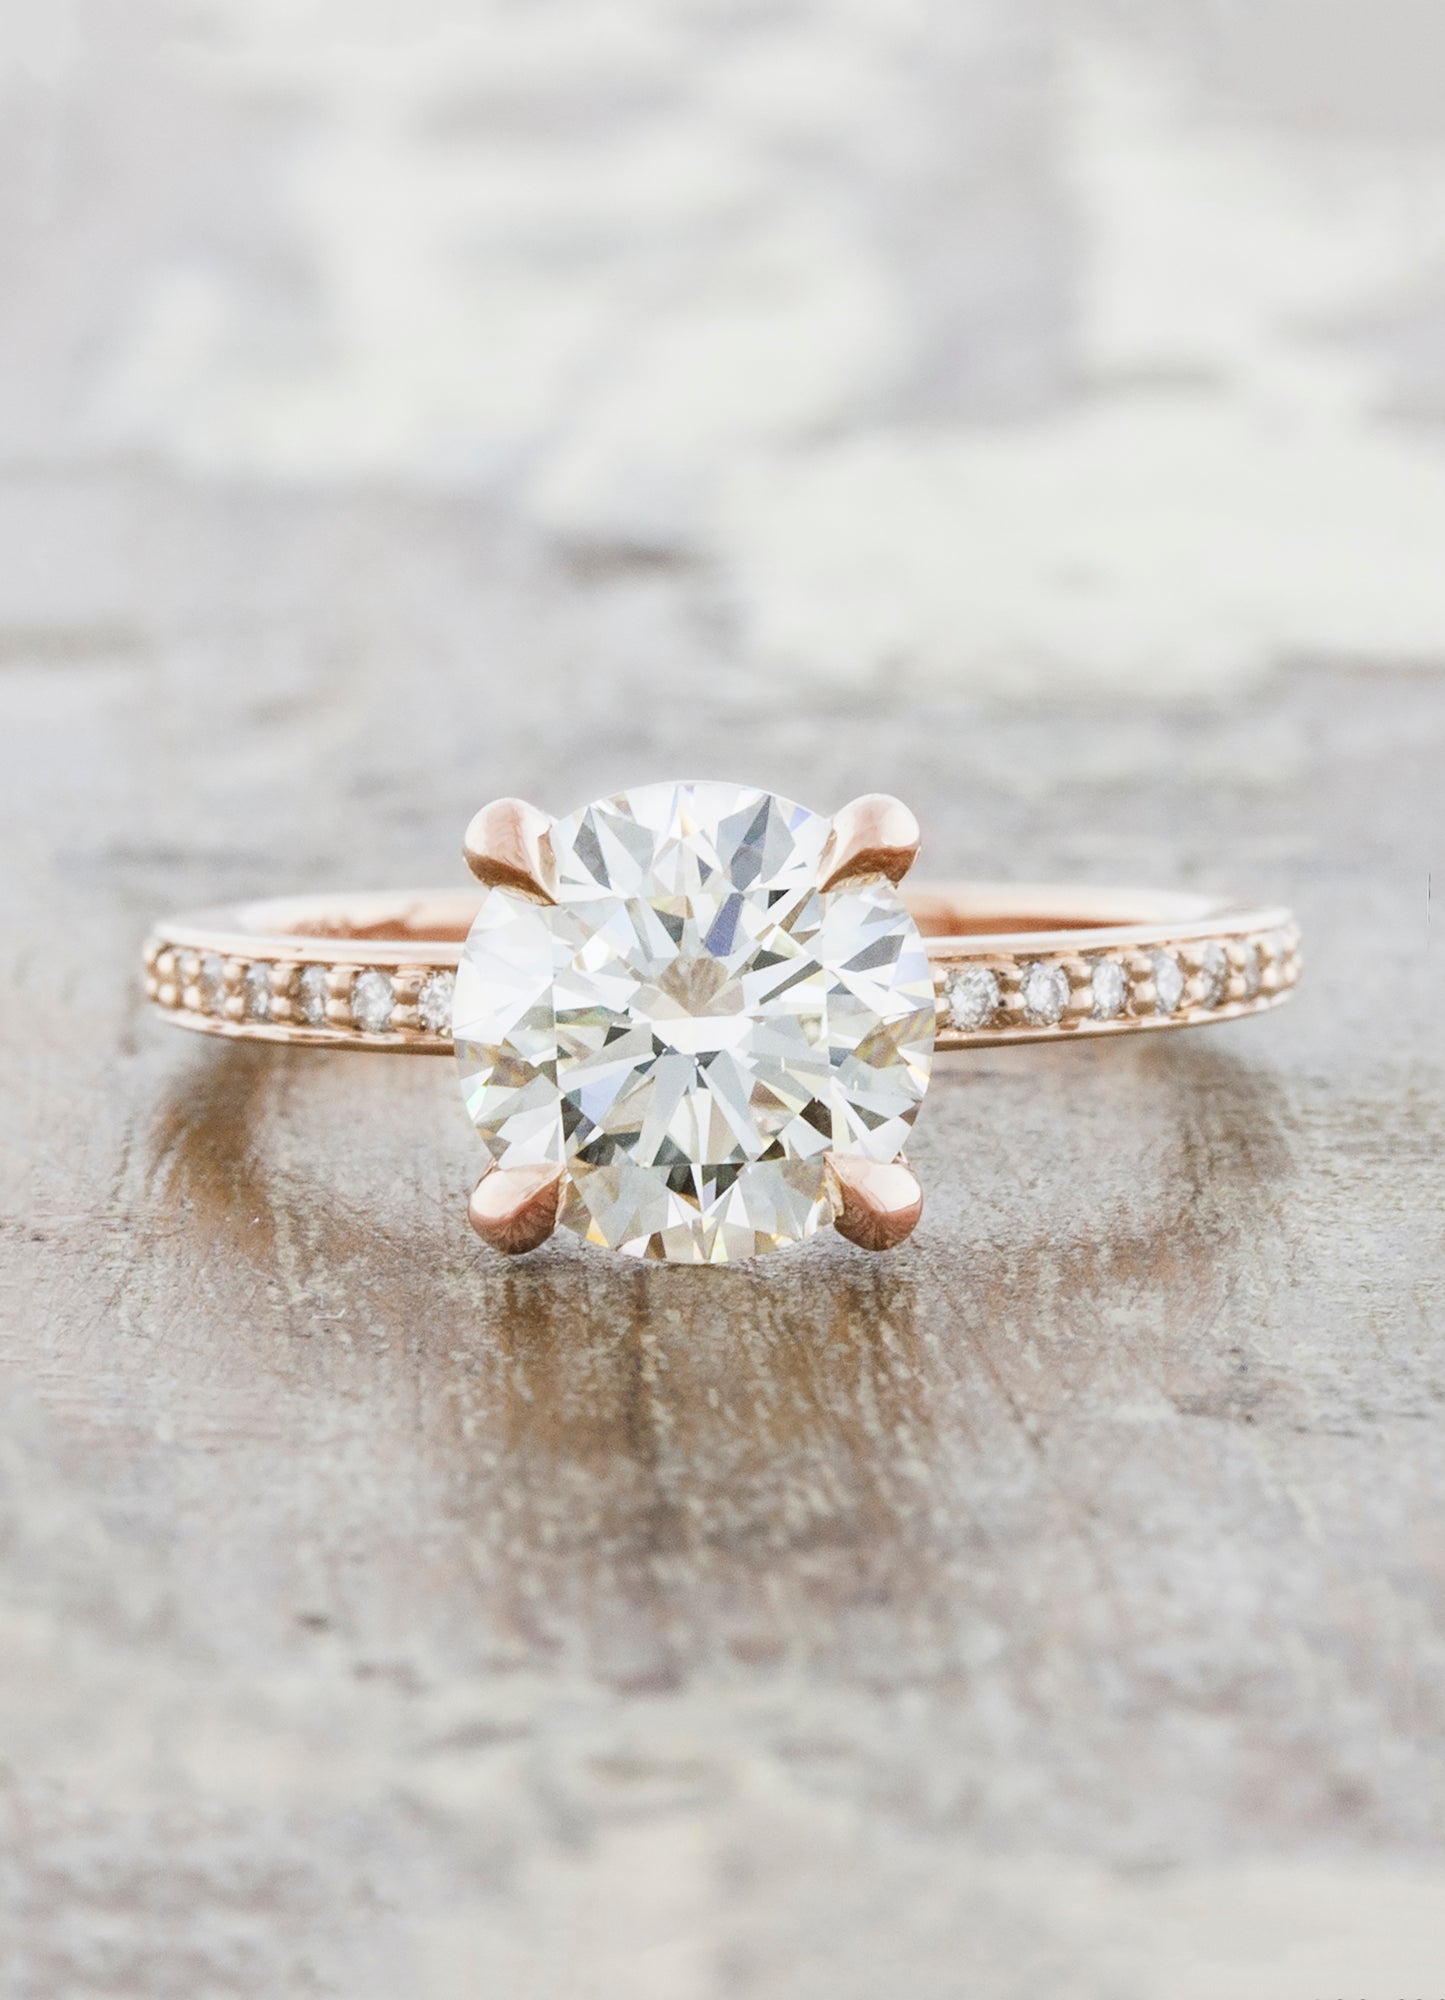 caption:Shown in 14k rose gold with 1.8ct diamond